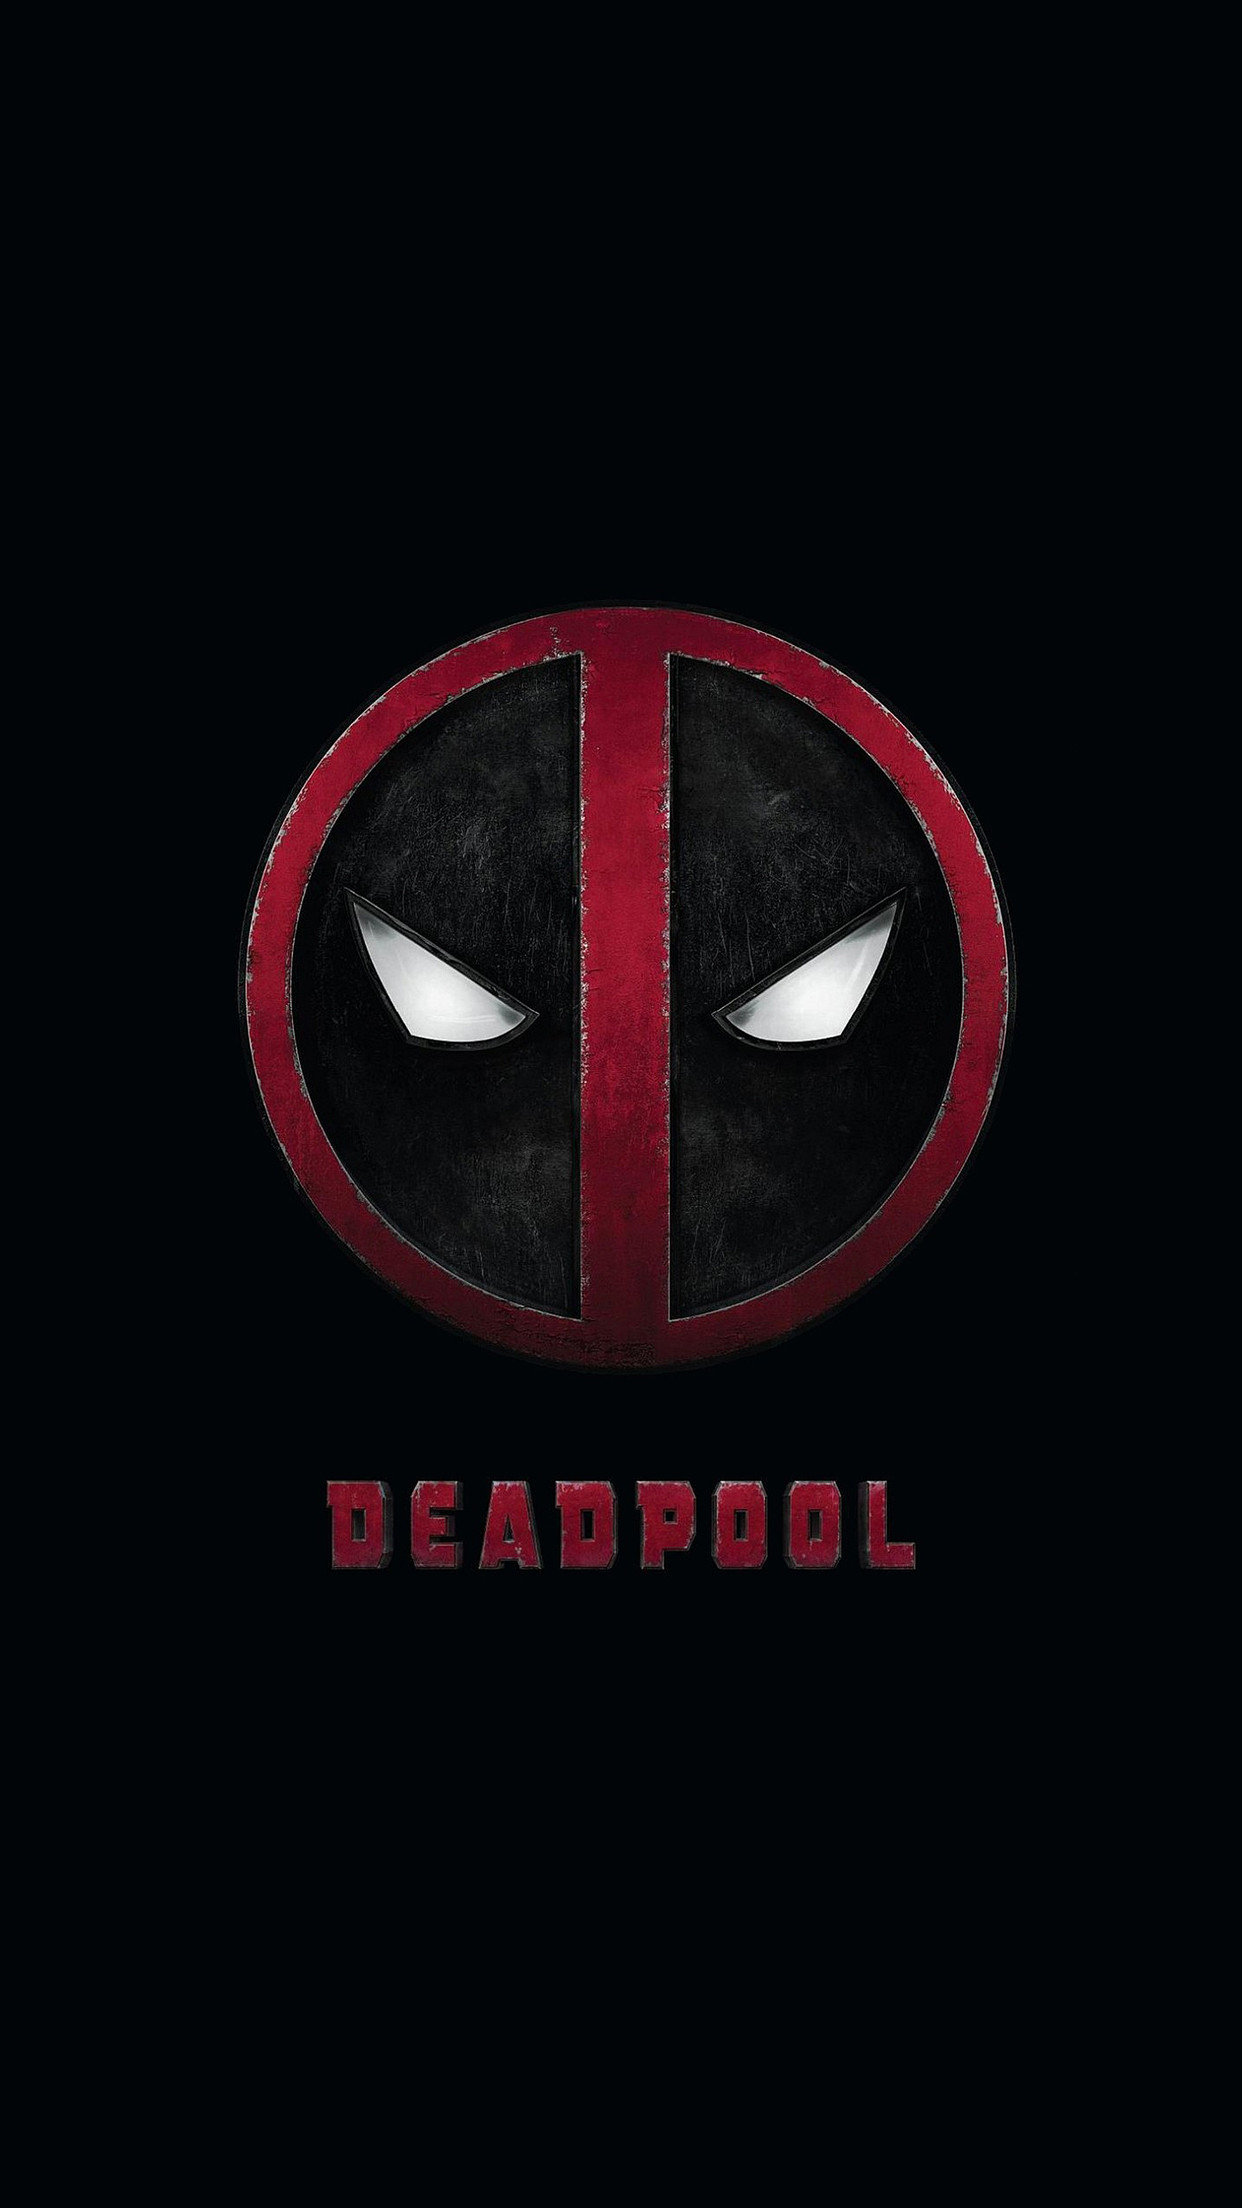 1242x2208 Image for Deadpool Iphone Wallpaper For Android #95y92